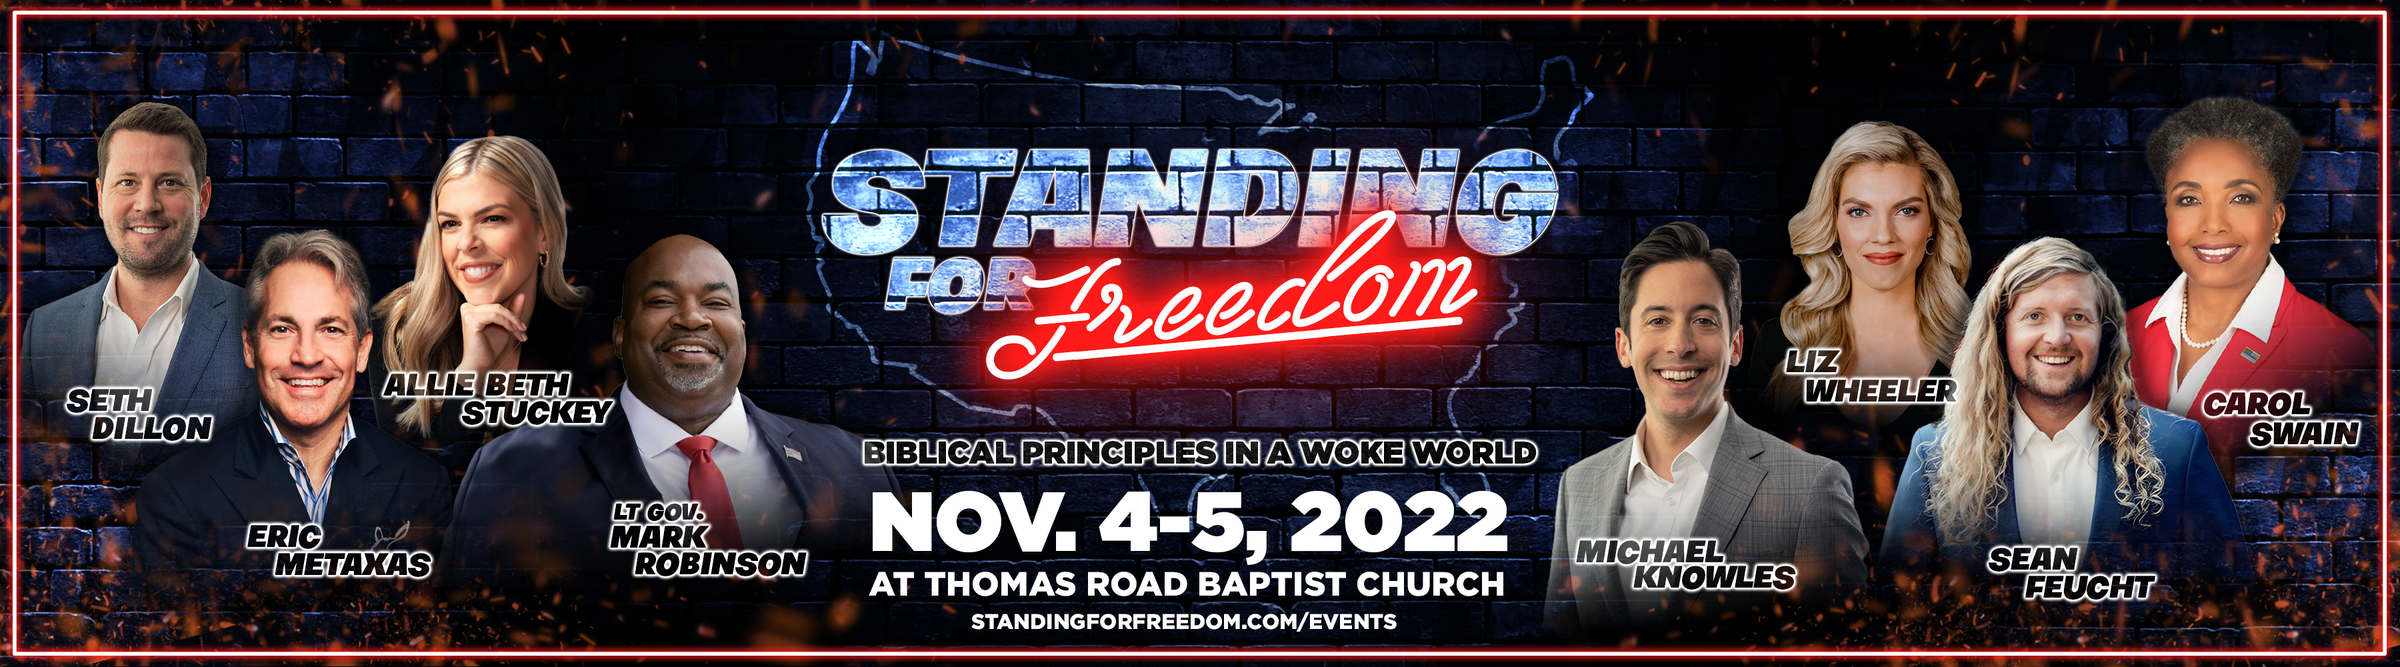 Standing For Freedom: Biblical Principles in a Woke World